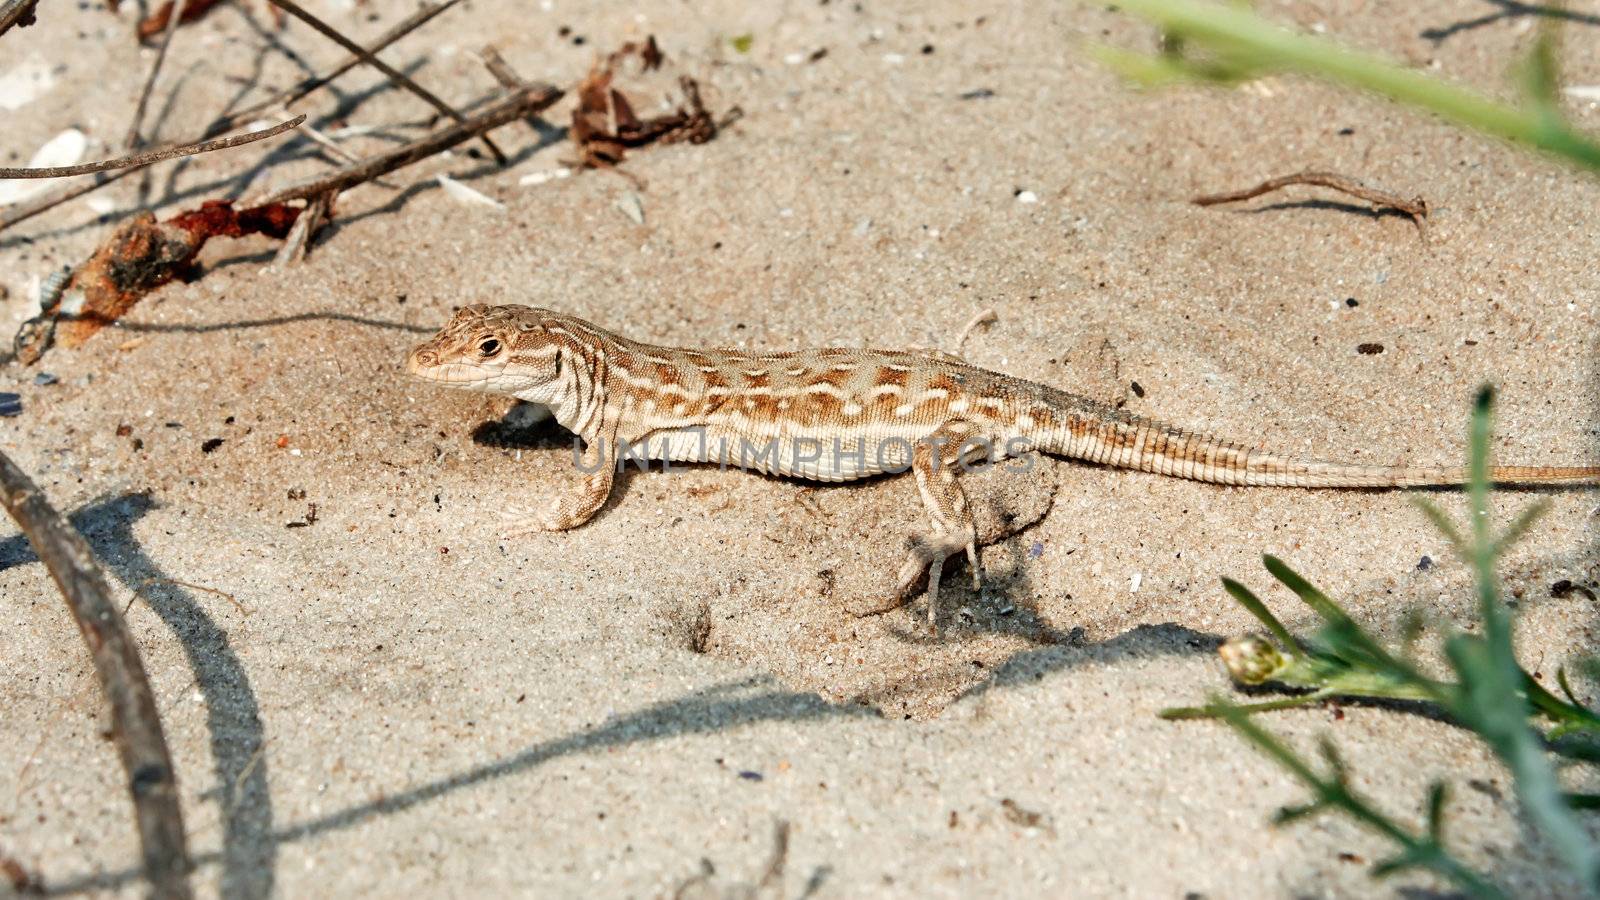 Lizard on the sand by qiiip